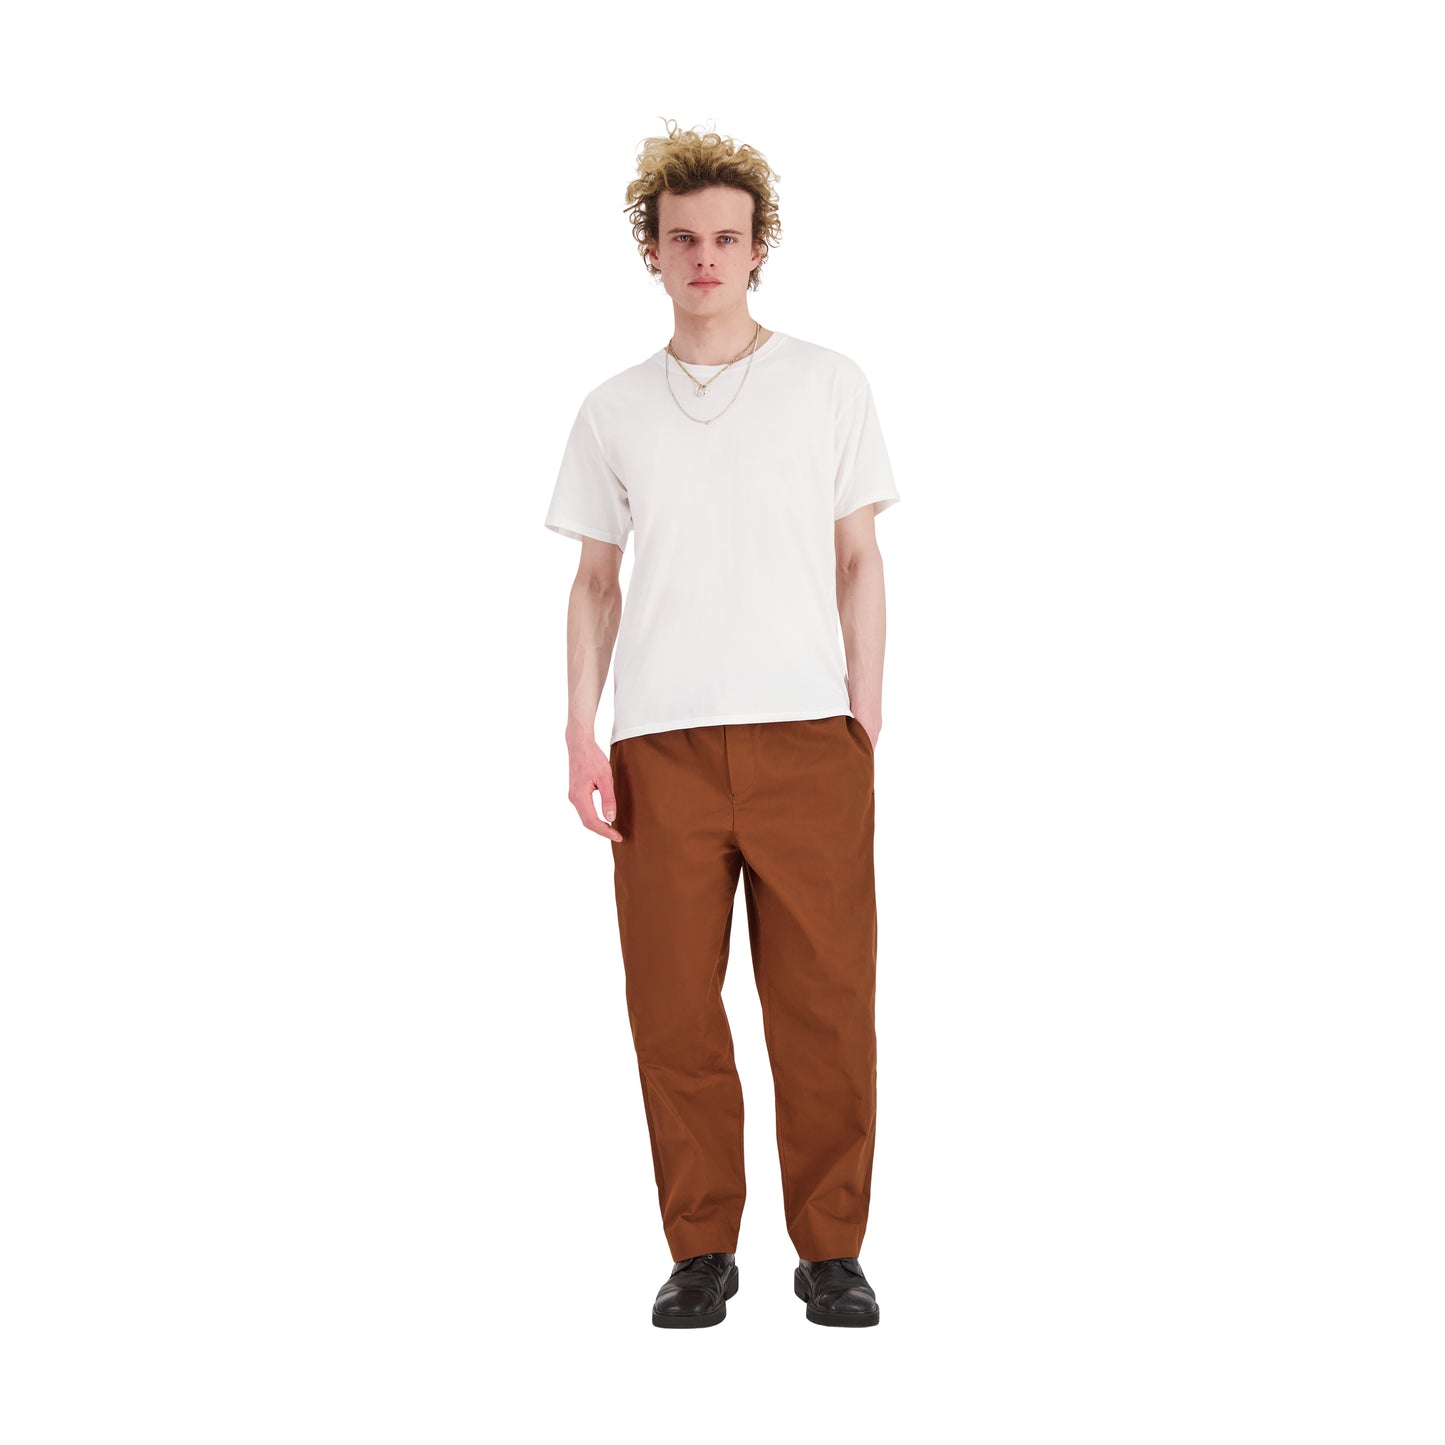 Ed Unlined Drawstring Trousers Rust Brown